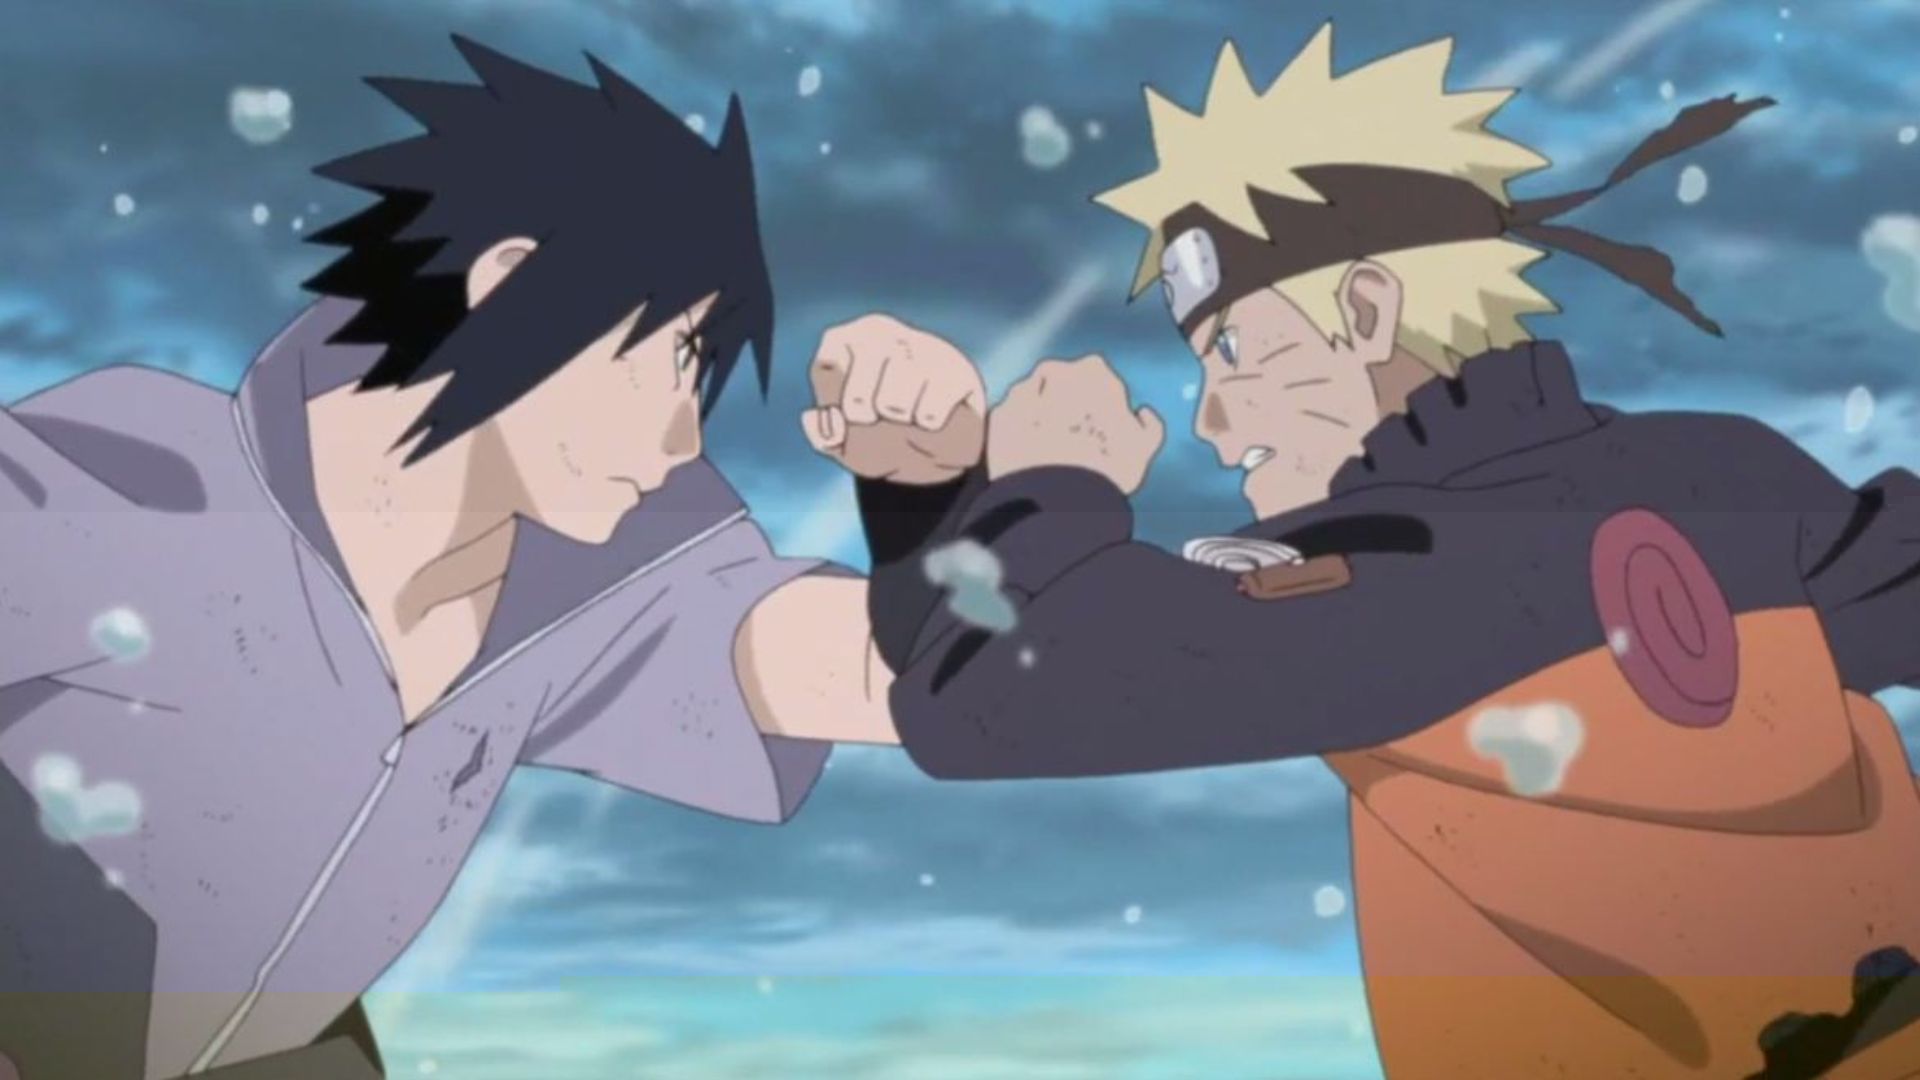 Every Hokage in Naruto, ranked based on their ruthlessness